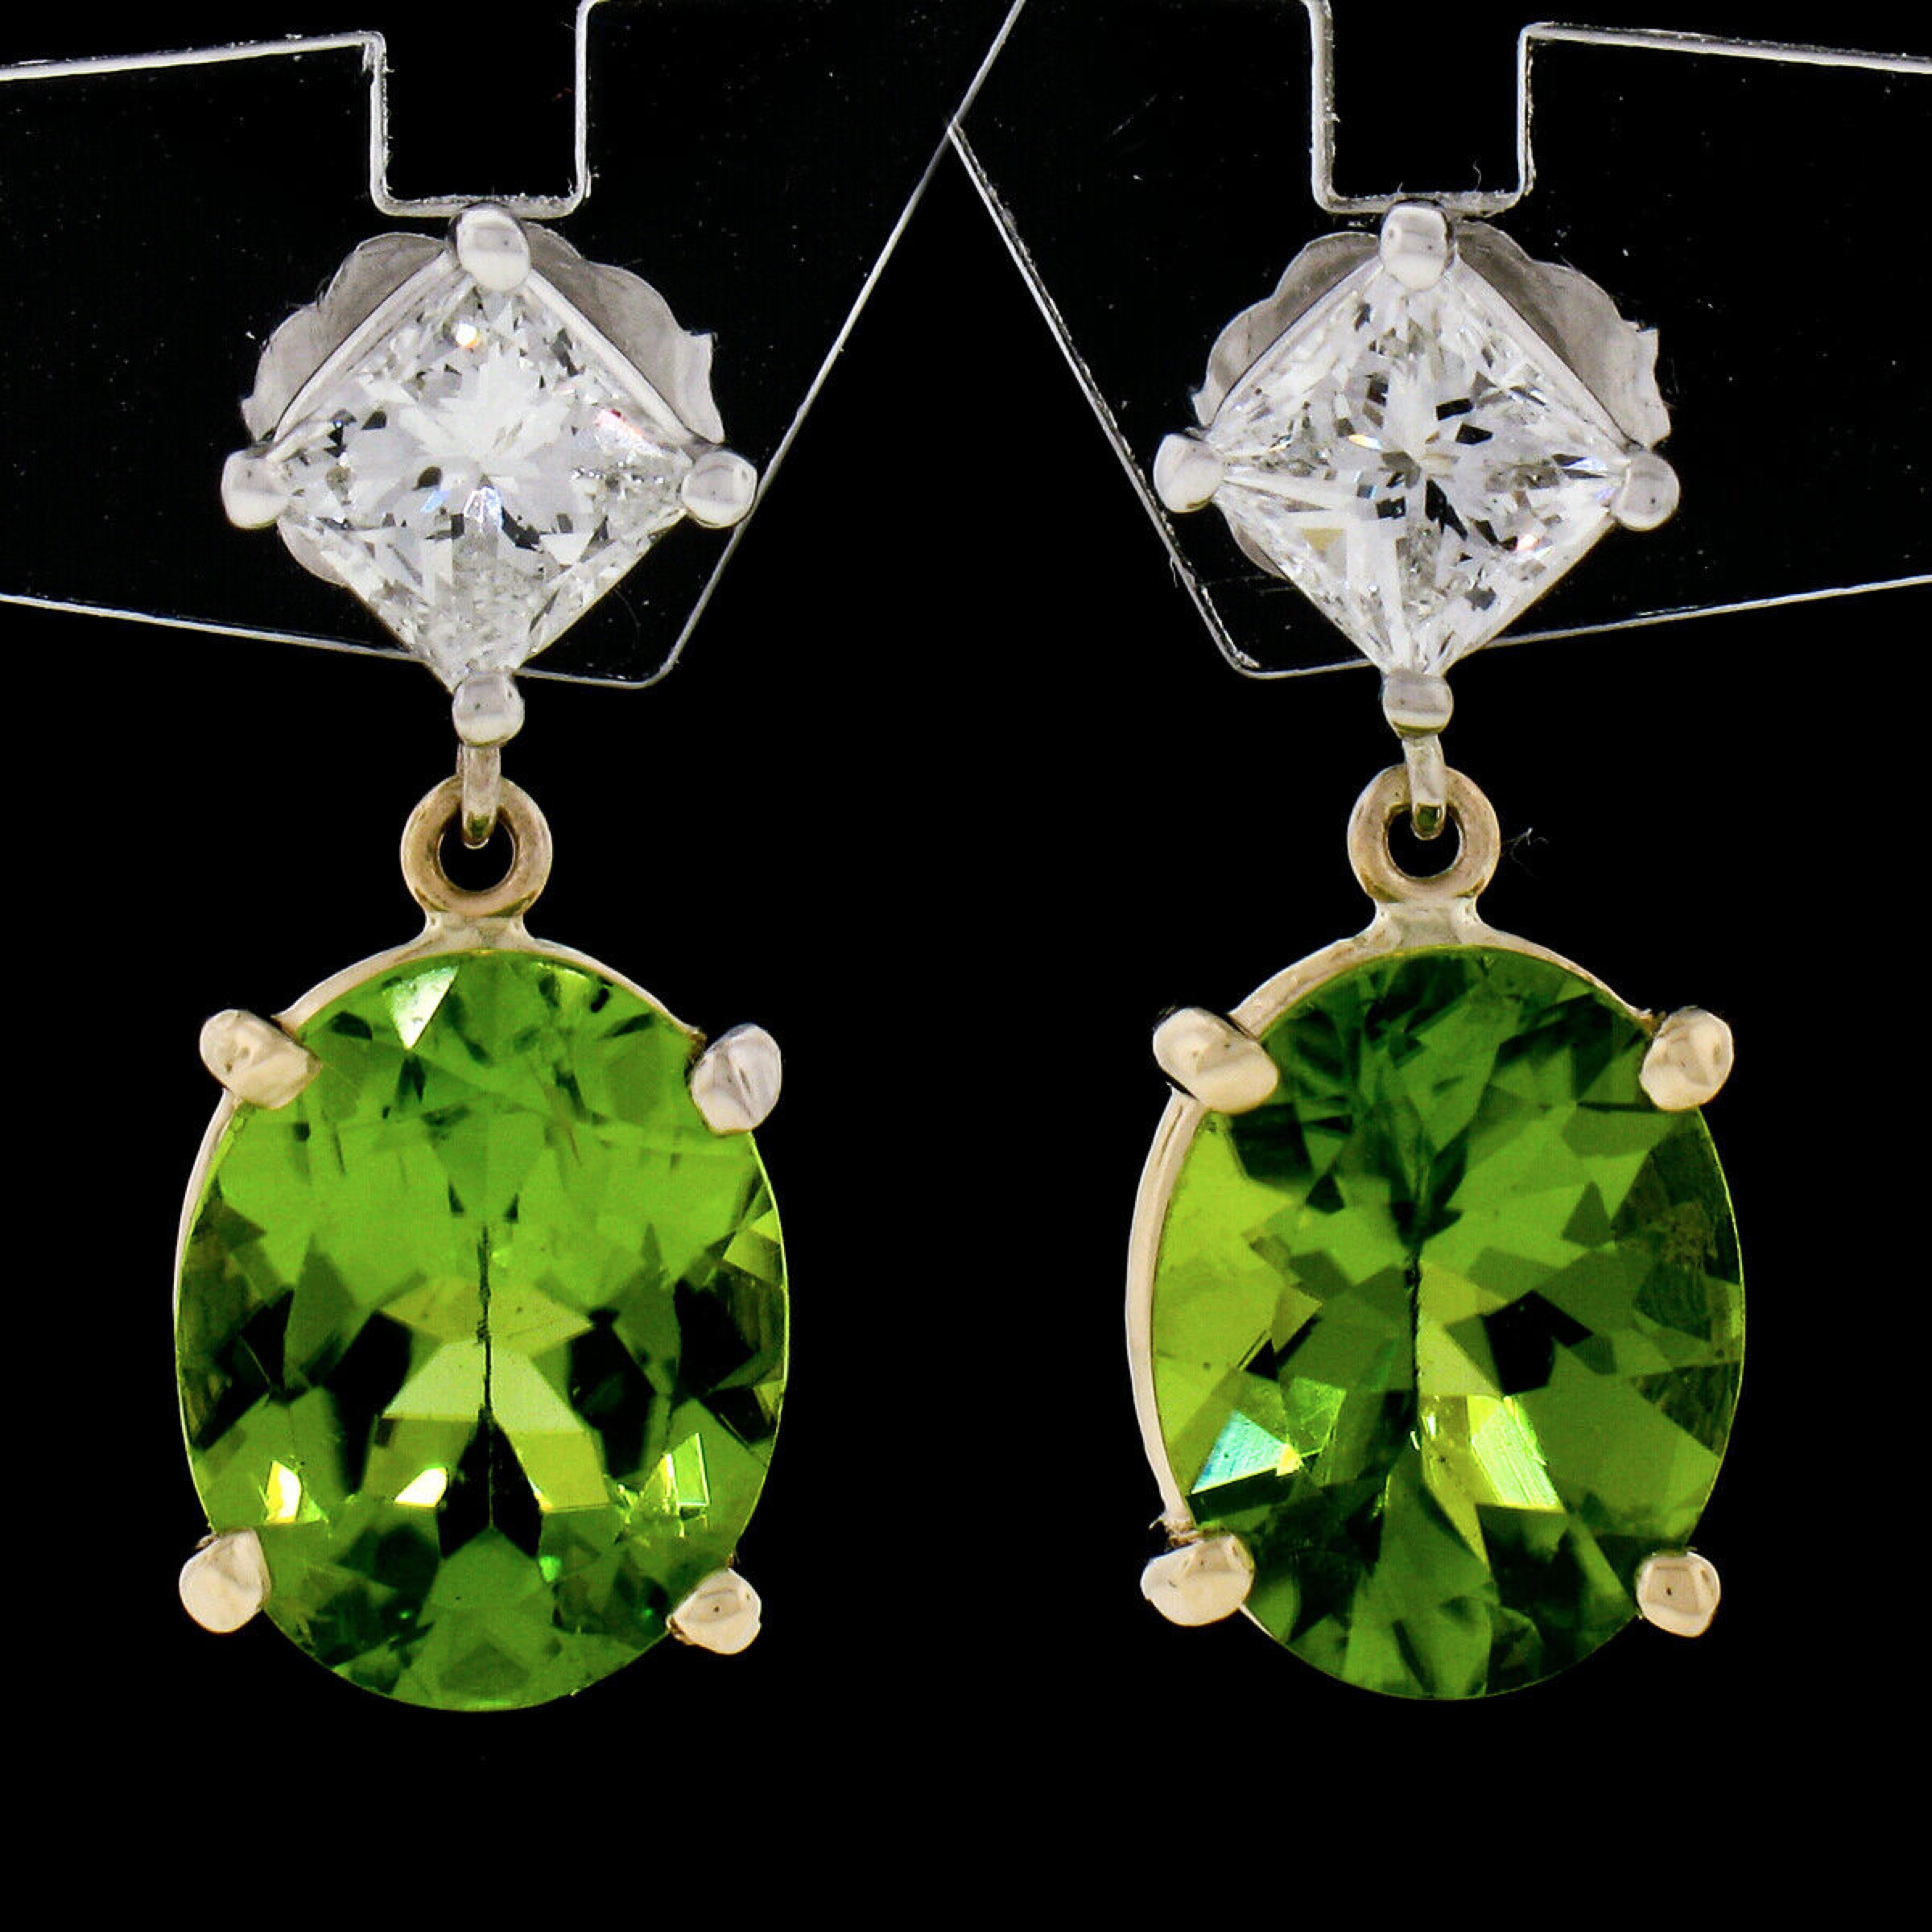 These fancy peridot and diamond drop/dangle earrings are crafted in solid 14k yellow and white gold and feature very well made prong settings that each elegantly embraces a gorgeous stone at its center. The beautiful, princess cut diamonds show